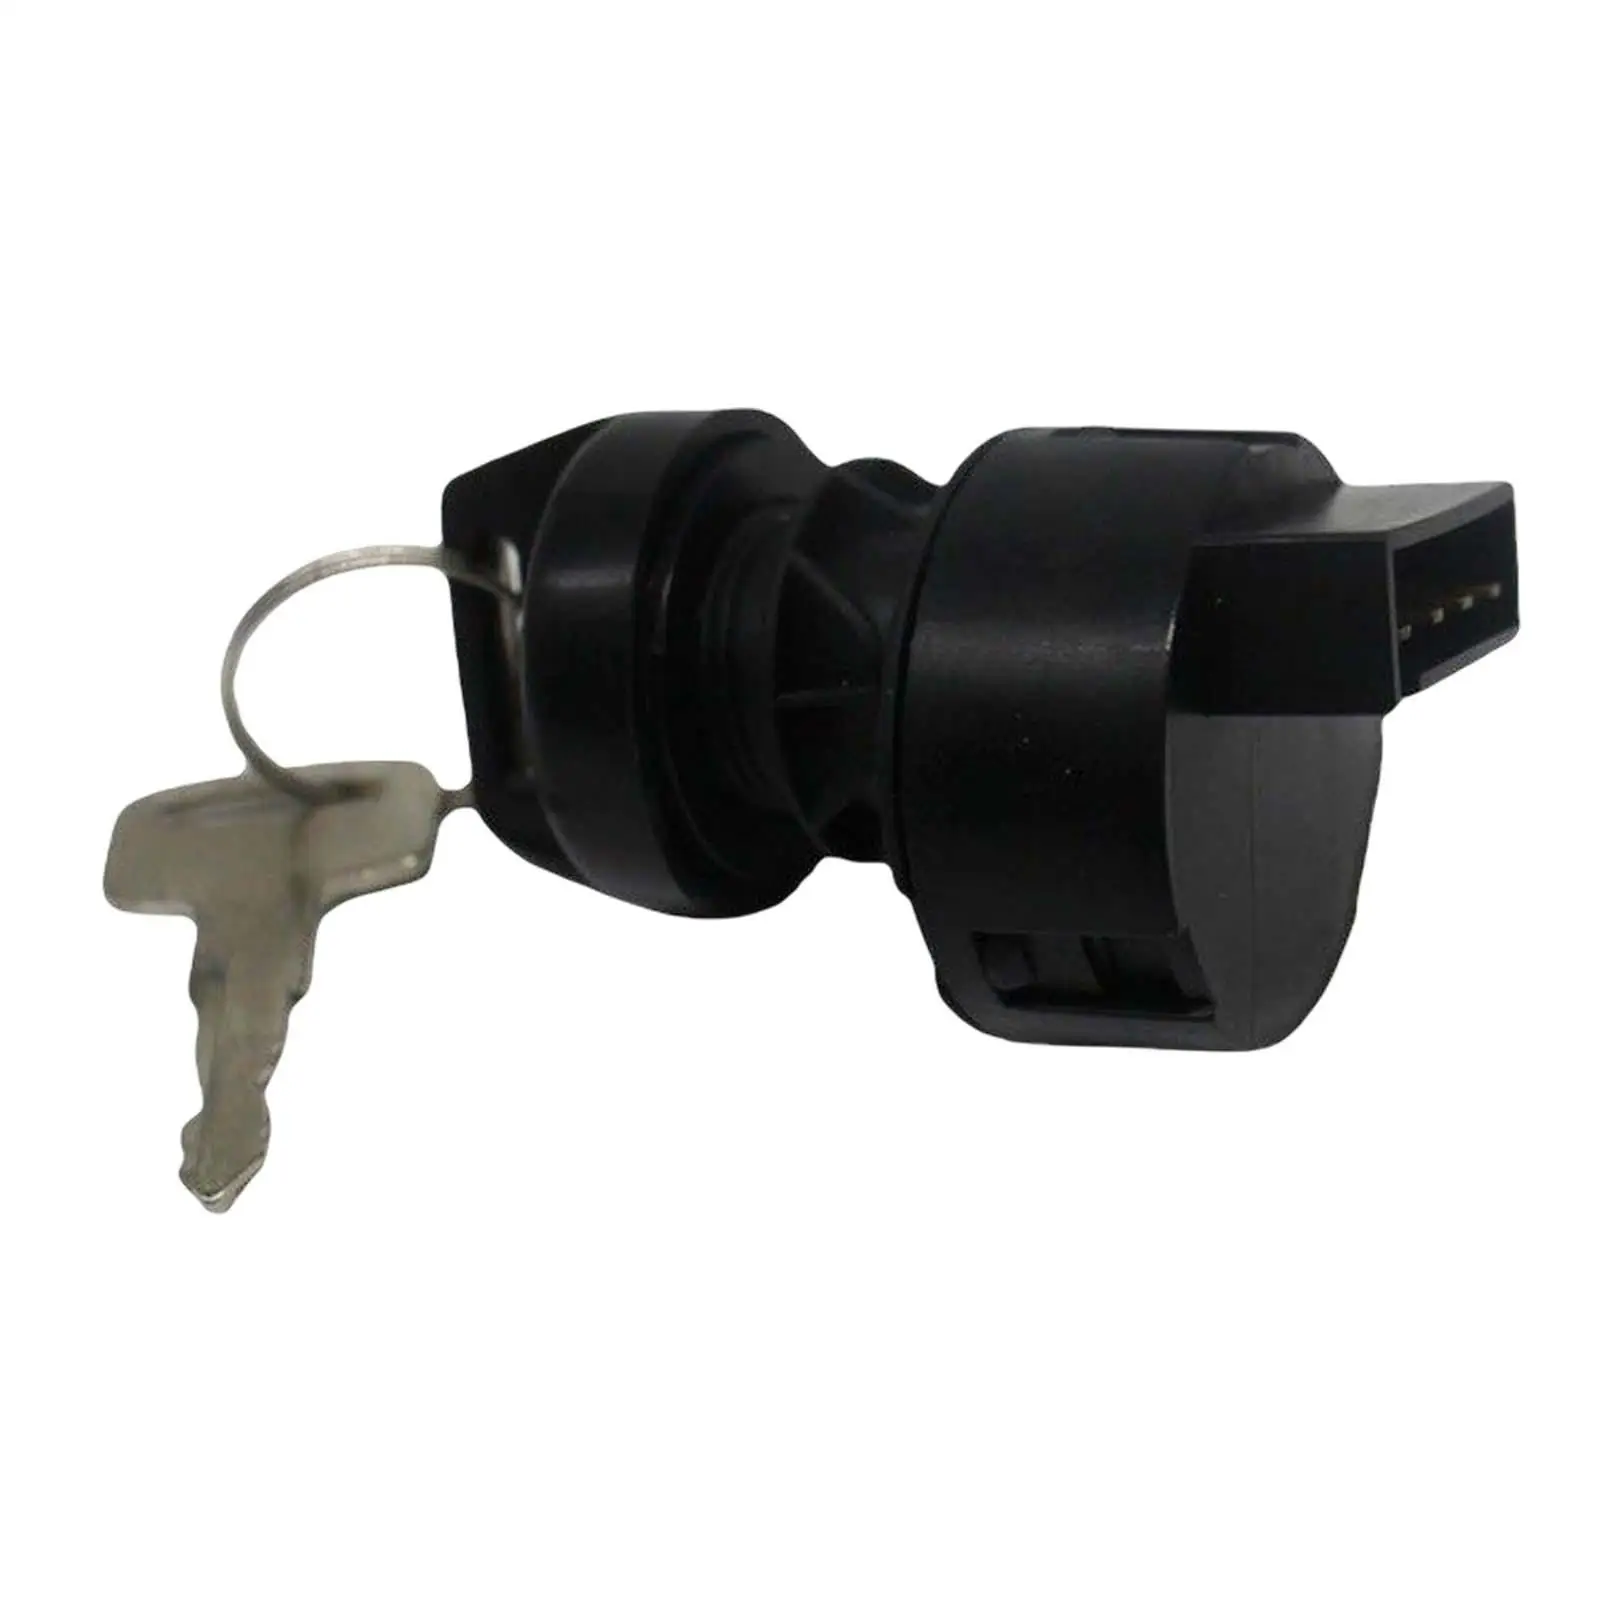 Ignition Switch Lock Replaces Accessories Practical with 2 Keys Easy to Install Premium Parts for 335 400 500 600